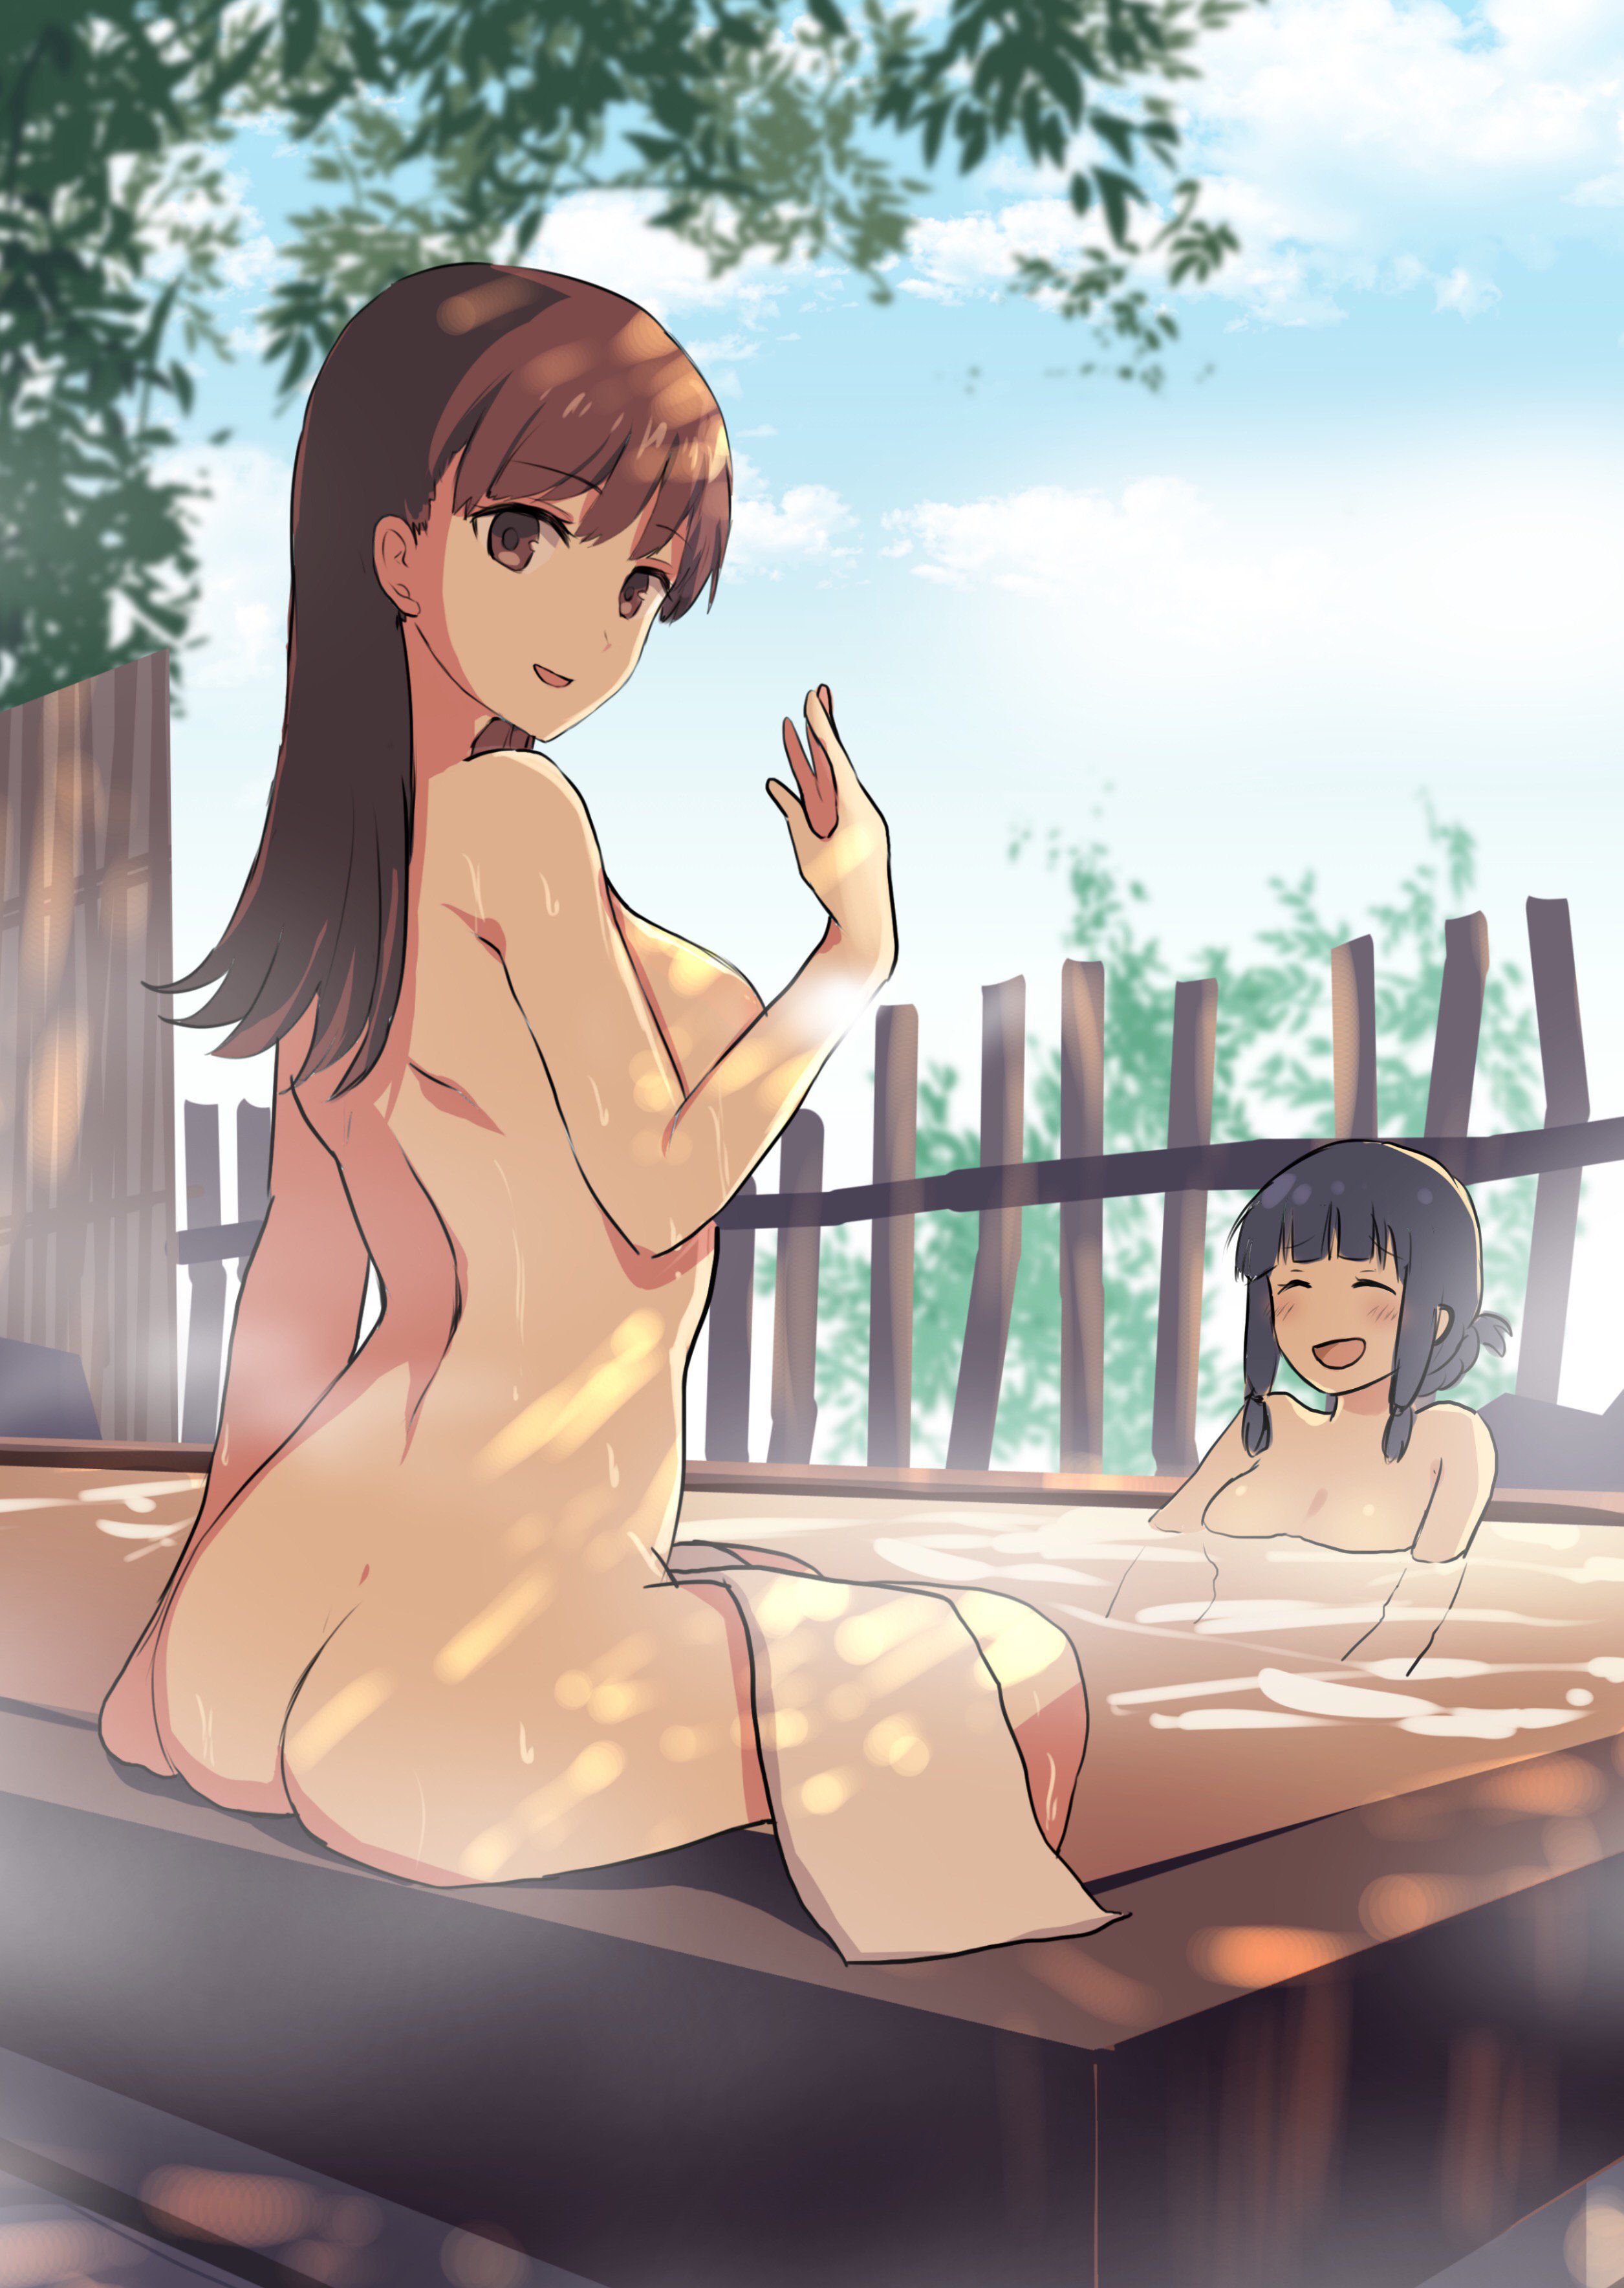 Erotic anime summary Erotic images of beautiful girls exposing the appearance without hail in the bath [50 sheets] 40